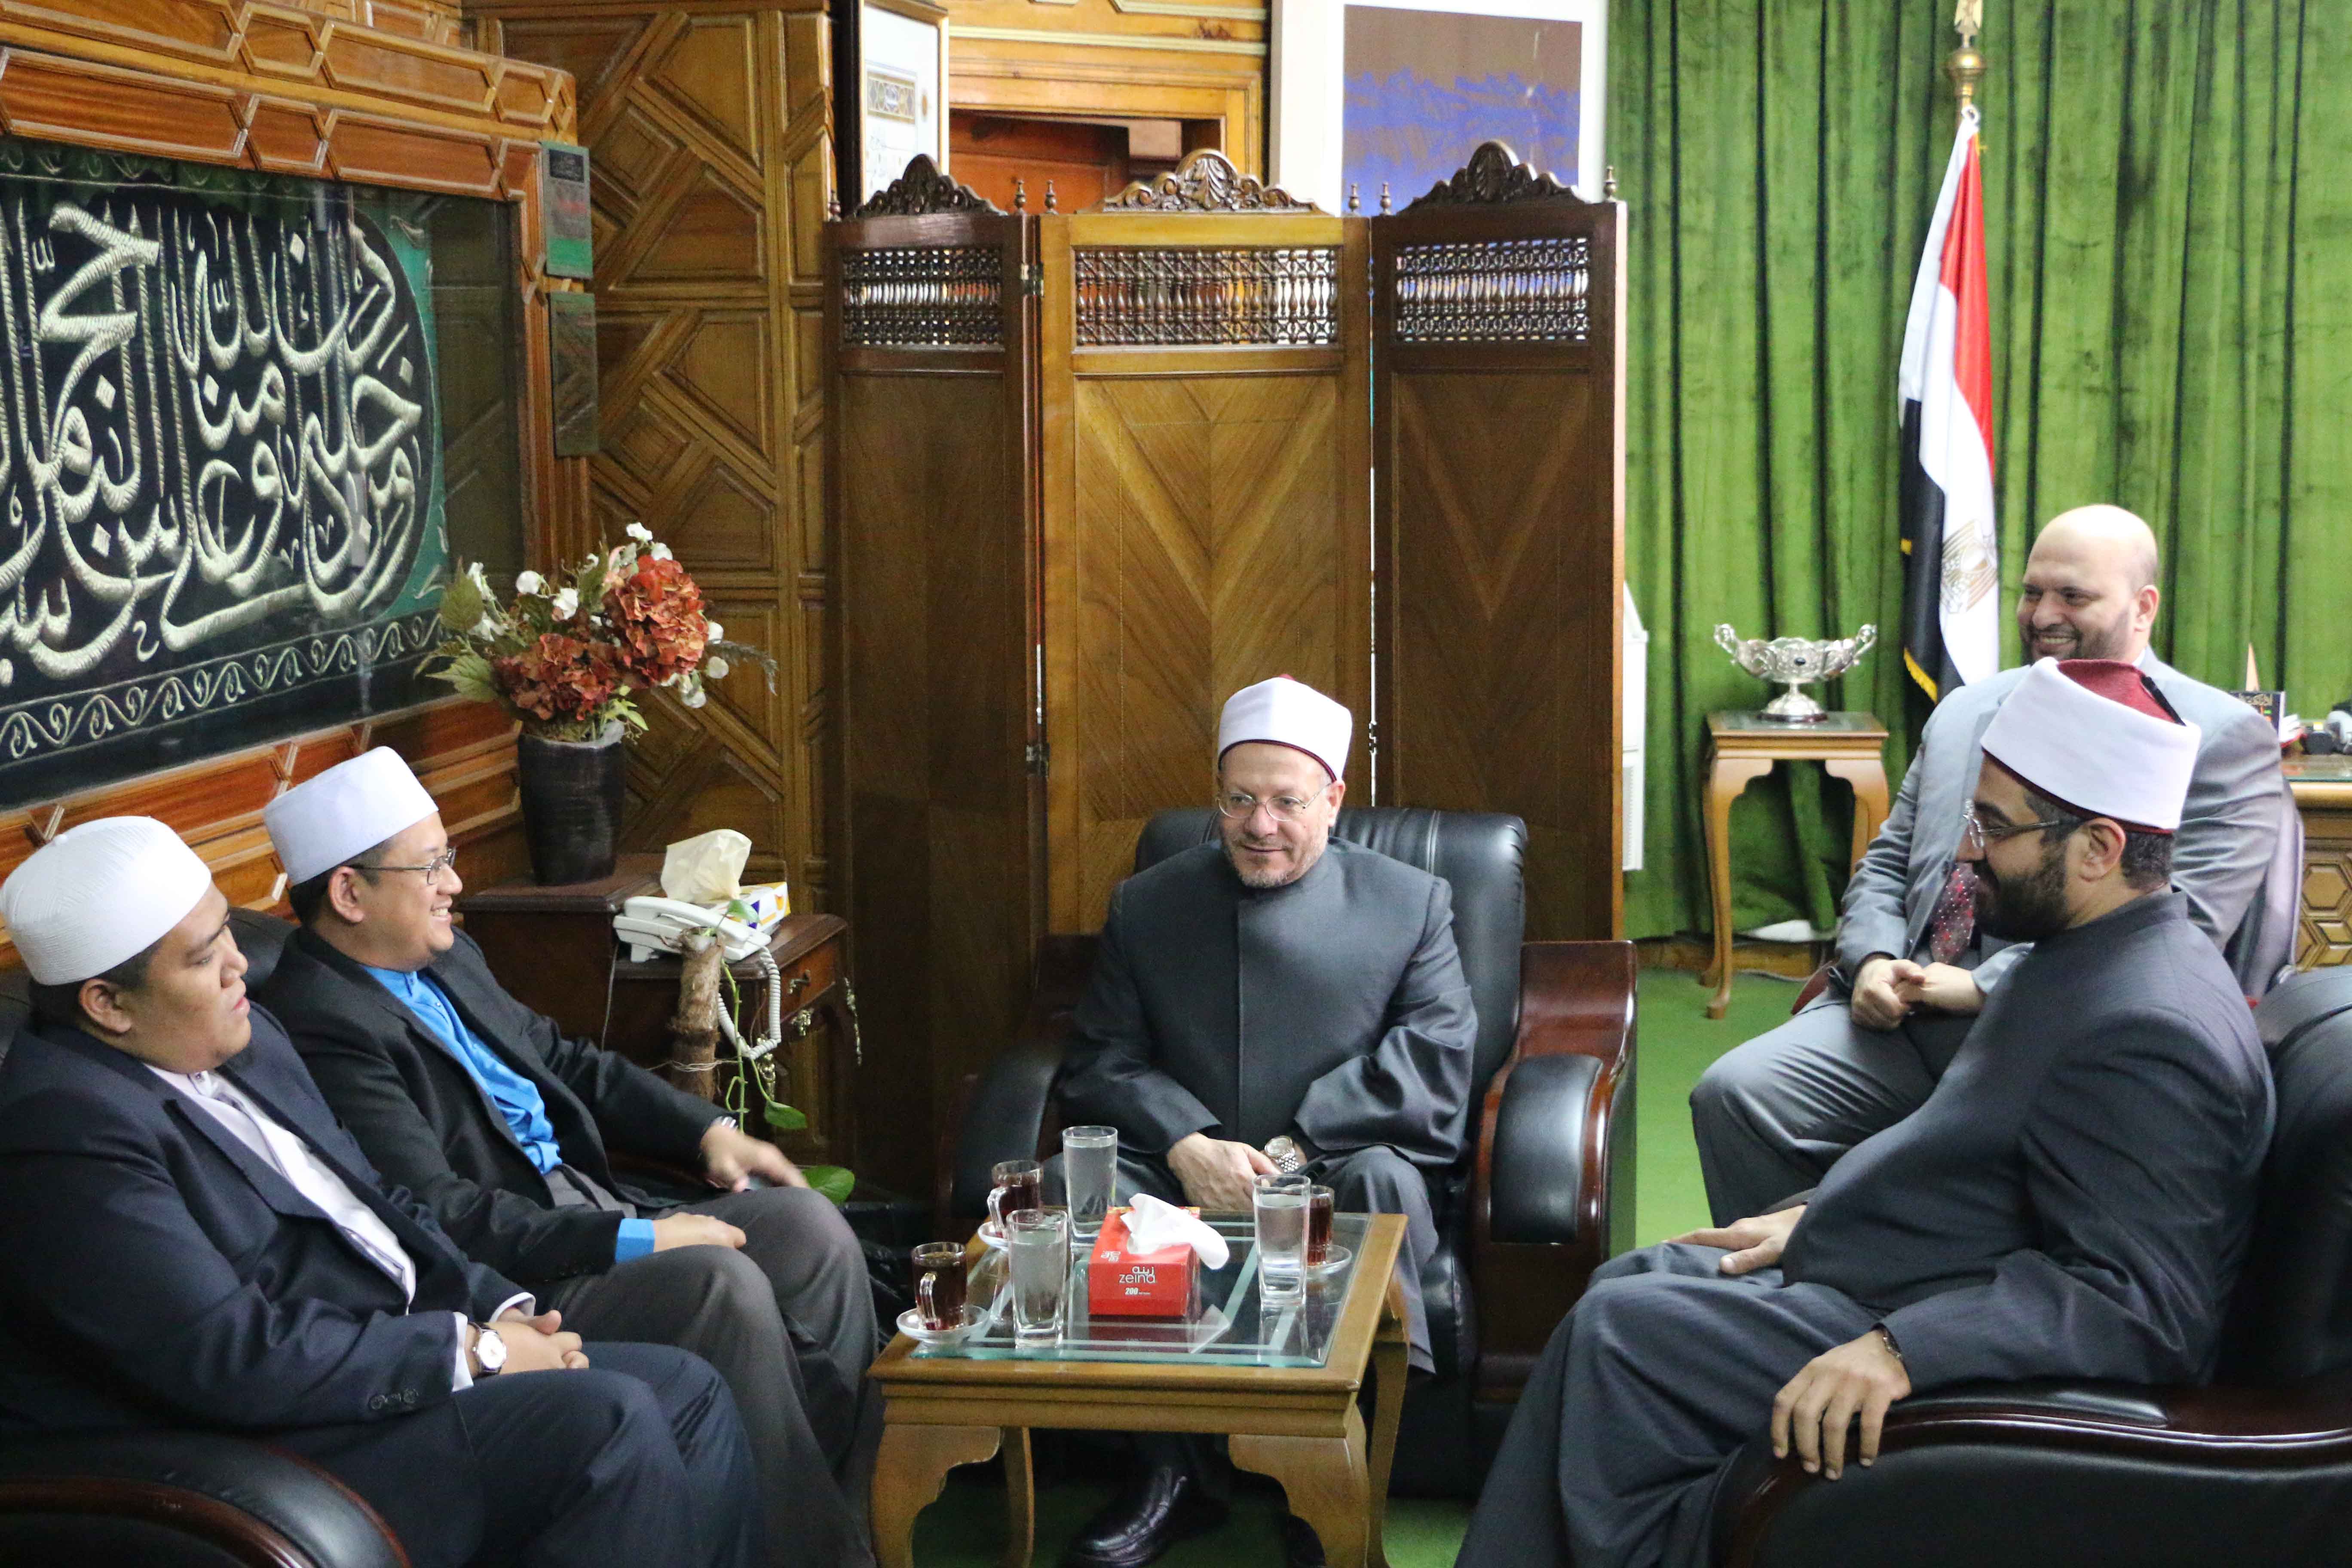 The Grand Mufti of Egypt receives the Grand Mufti of Singapore to discuss means of religious cooperation